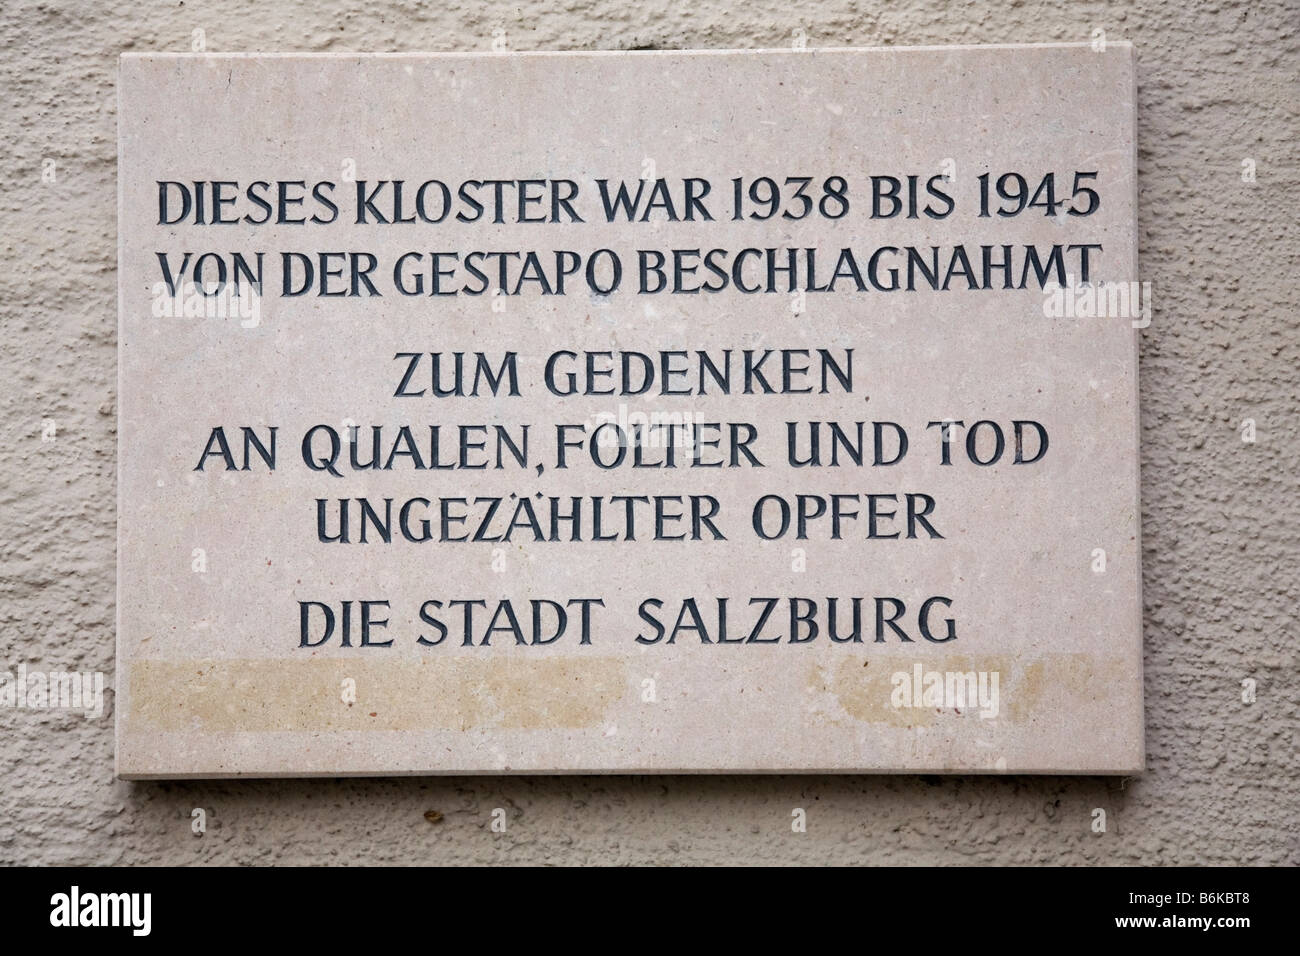 A sign in the historic city of Salzburg acts as a memorial to the victims of the Gestapo, the Nazi secret police. Stock Photo